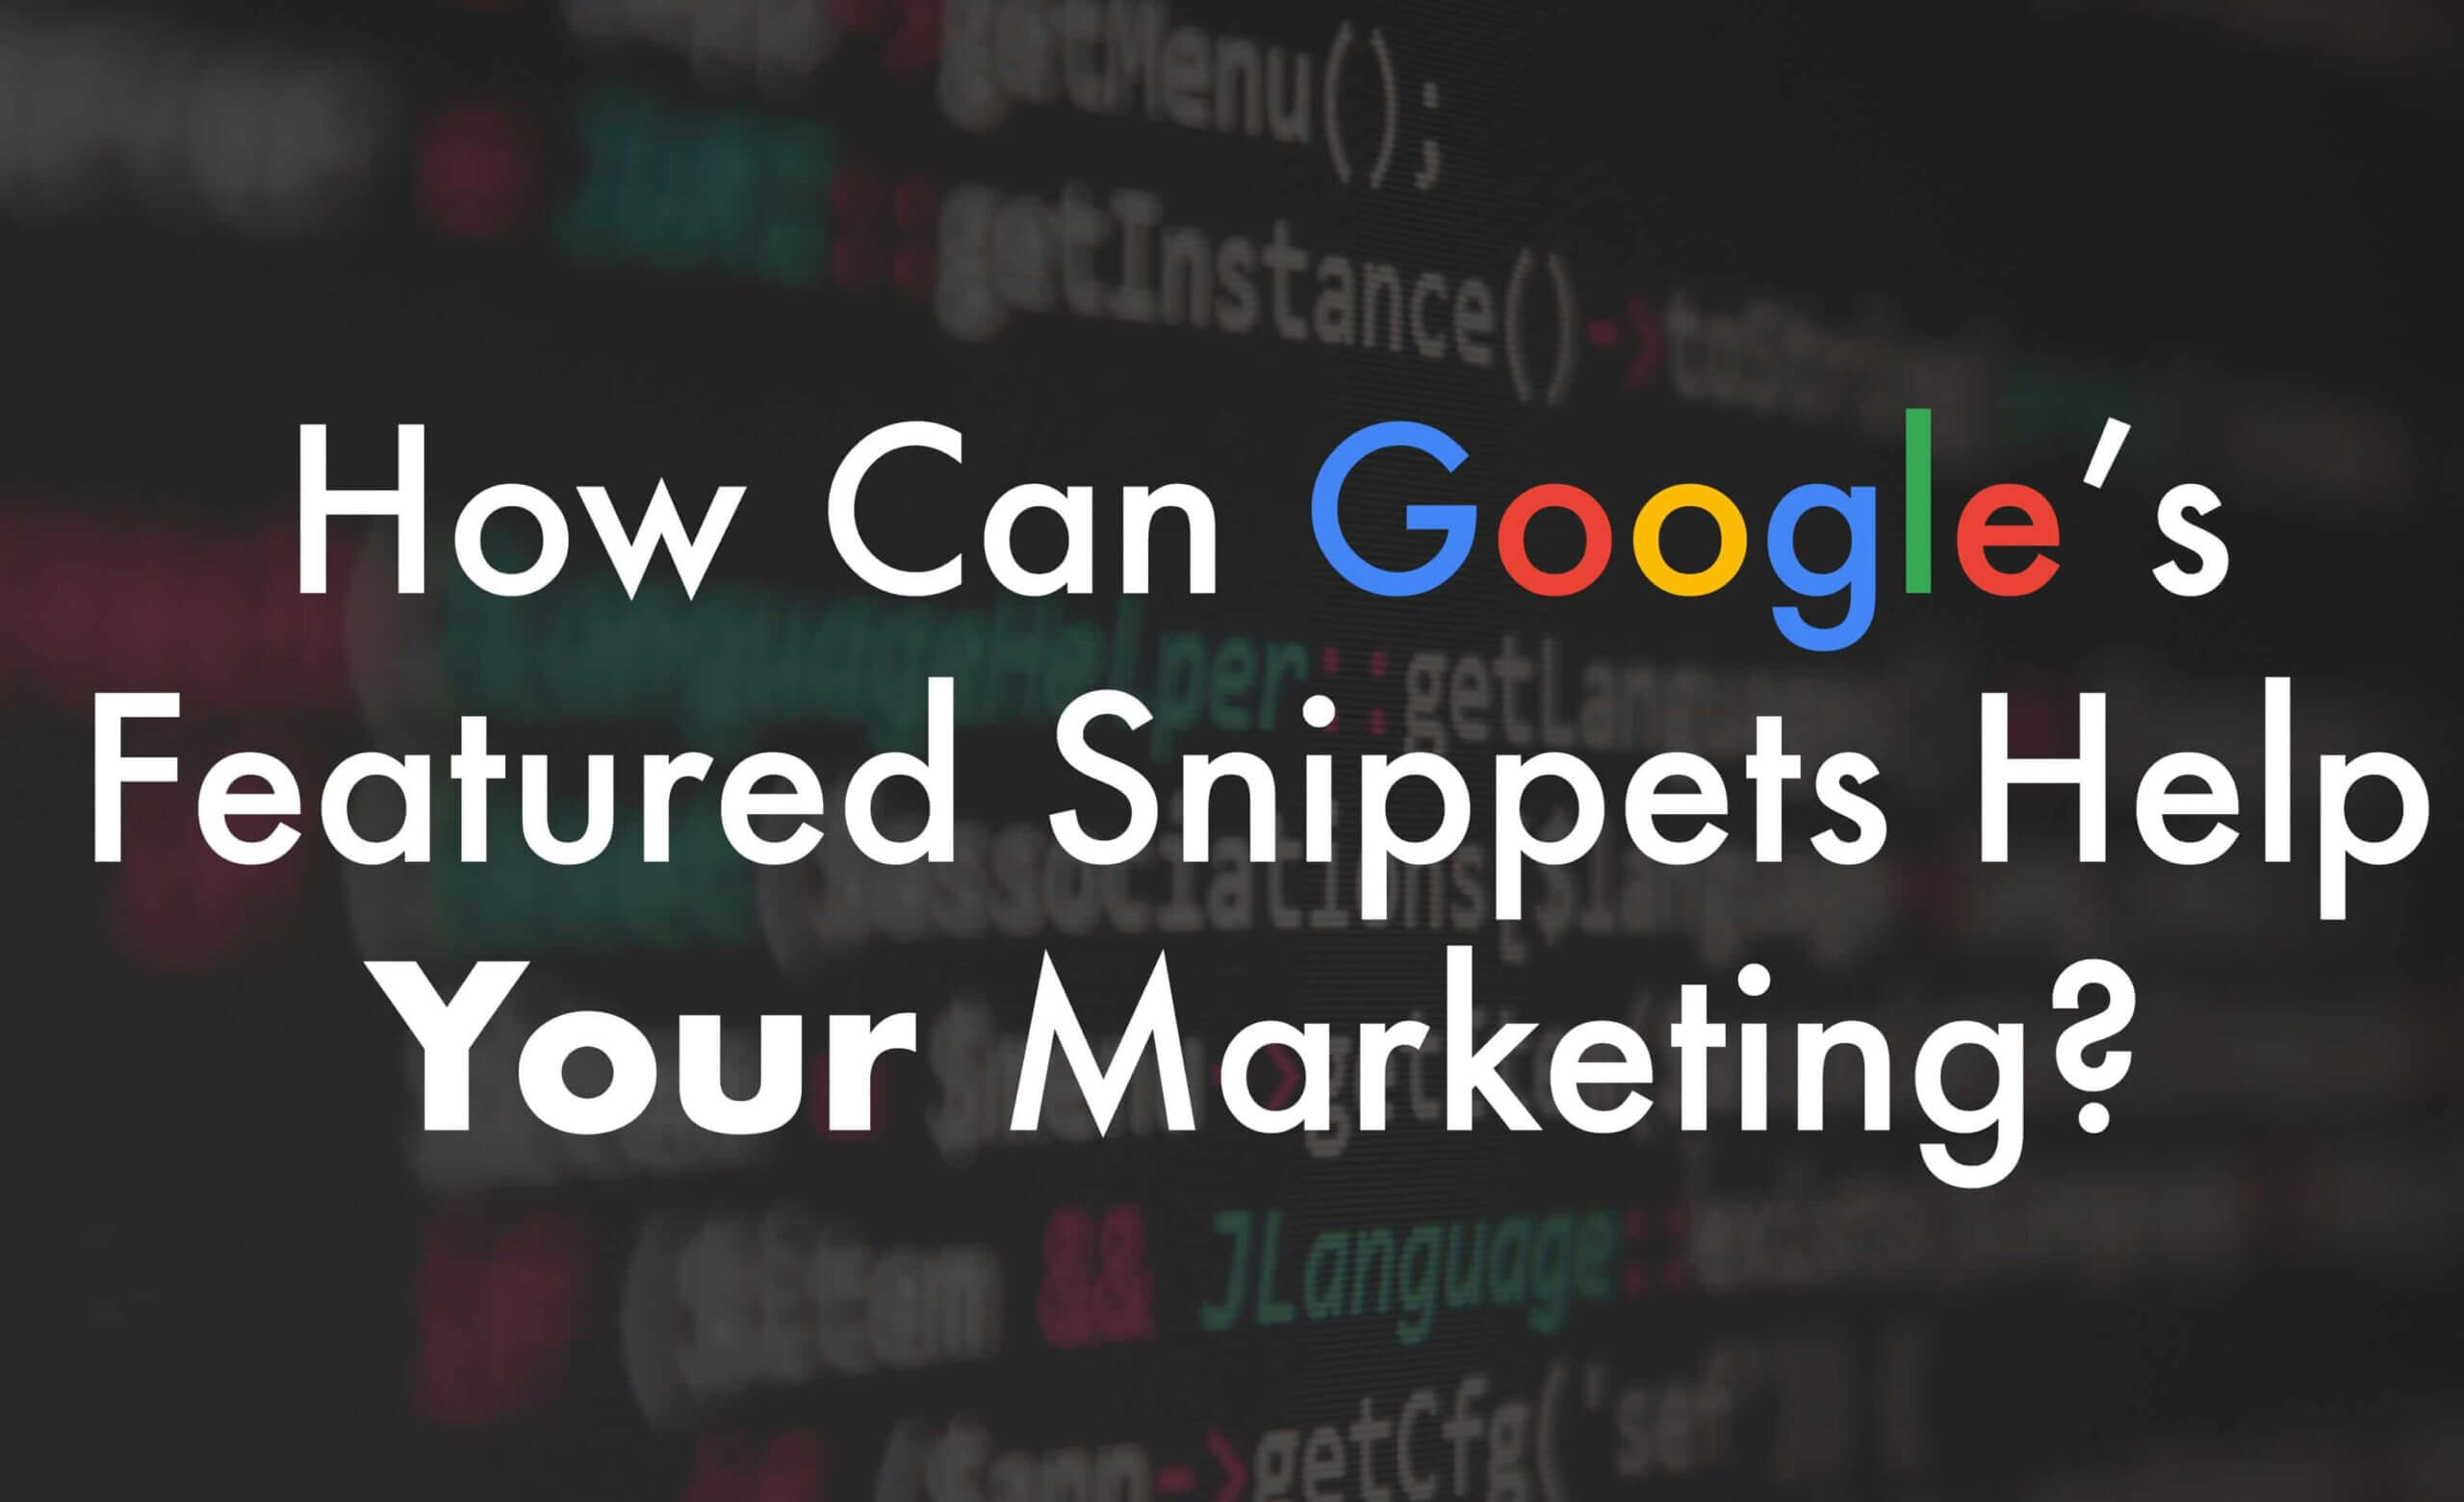 How Can Google’s Featured Snippets Help Your Marketing?